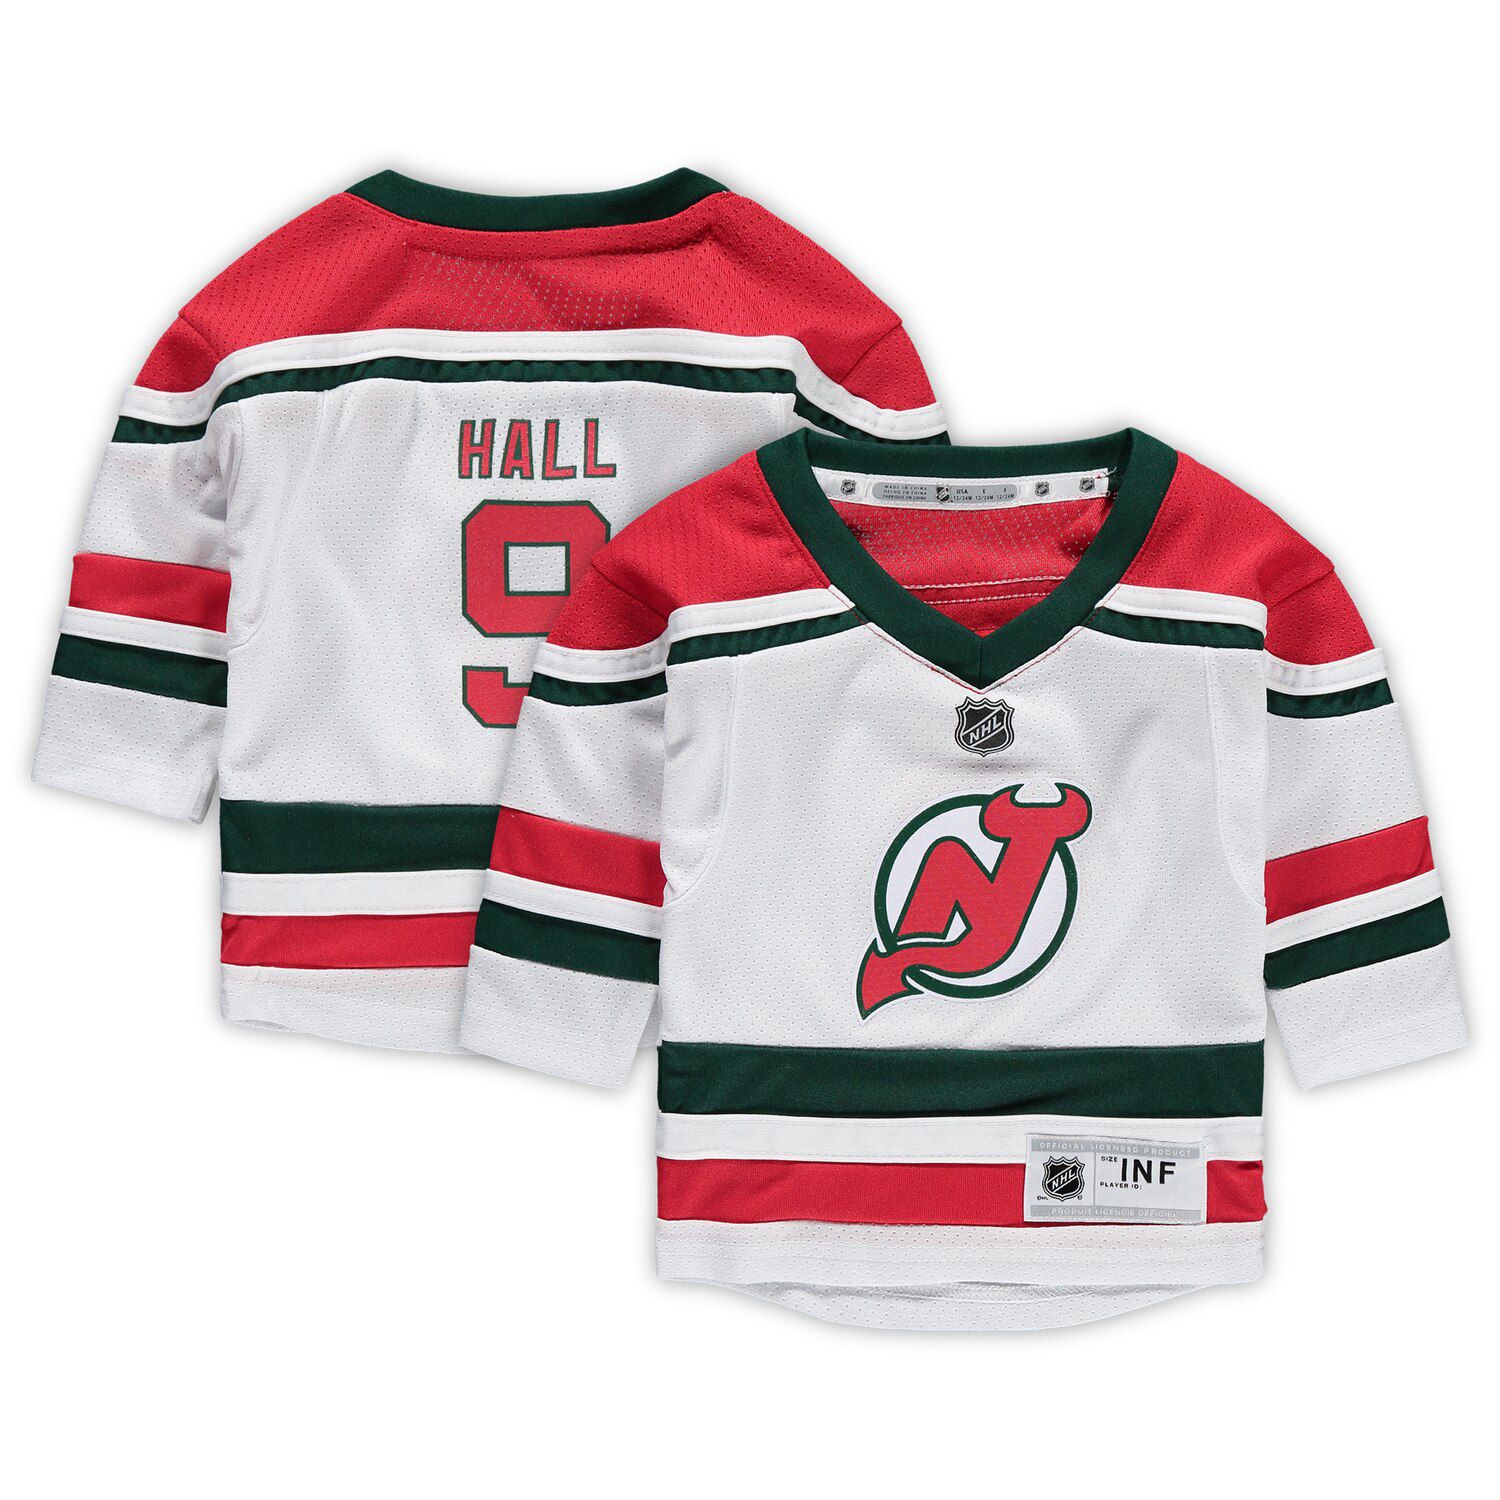 new jersey devils baby clothes